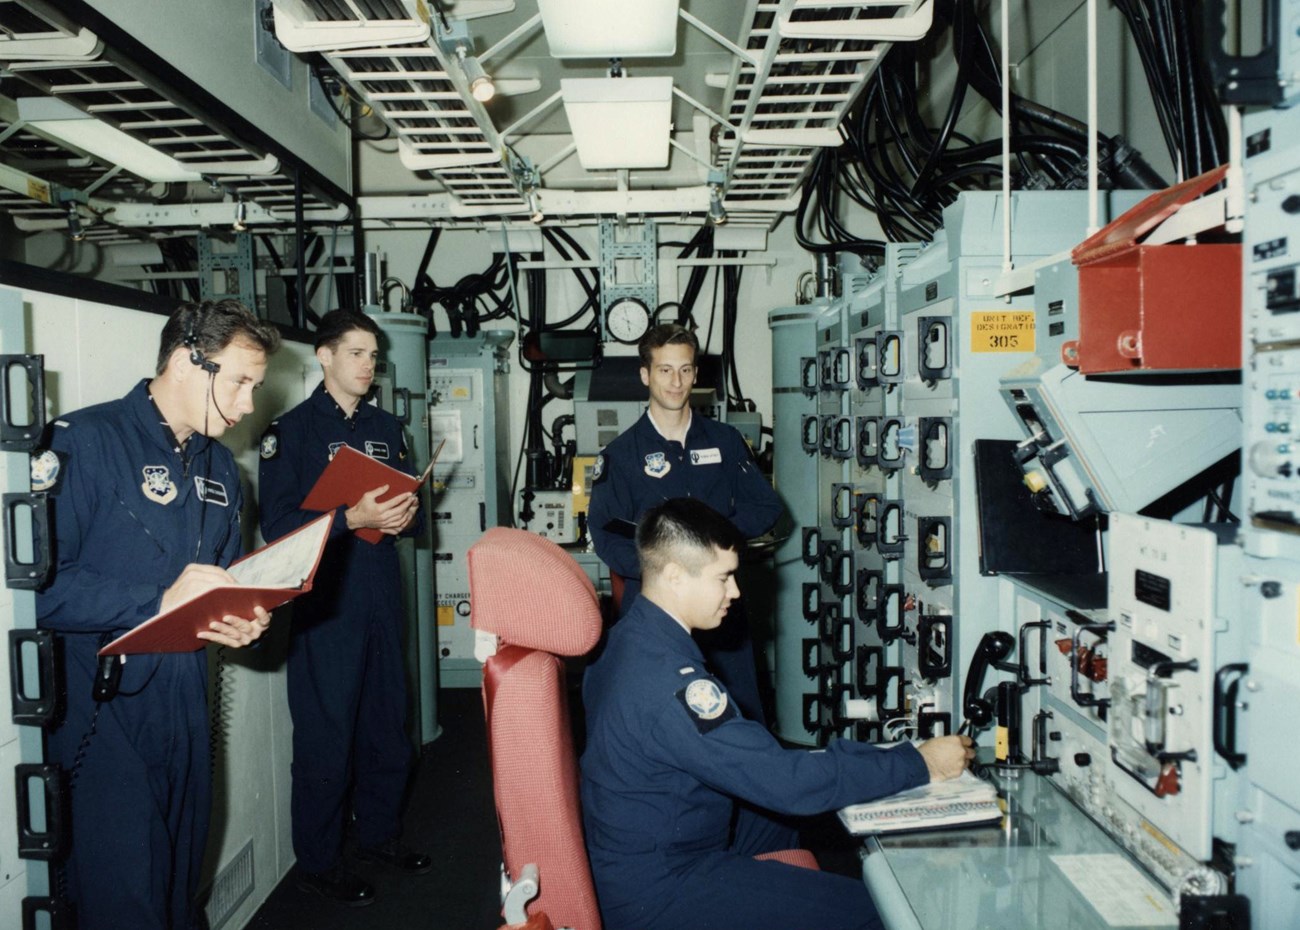 Uniformed officers in a room with electronic consoles